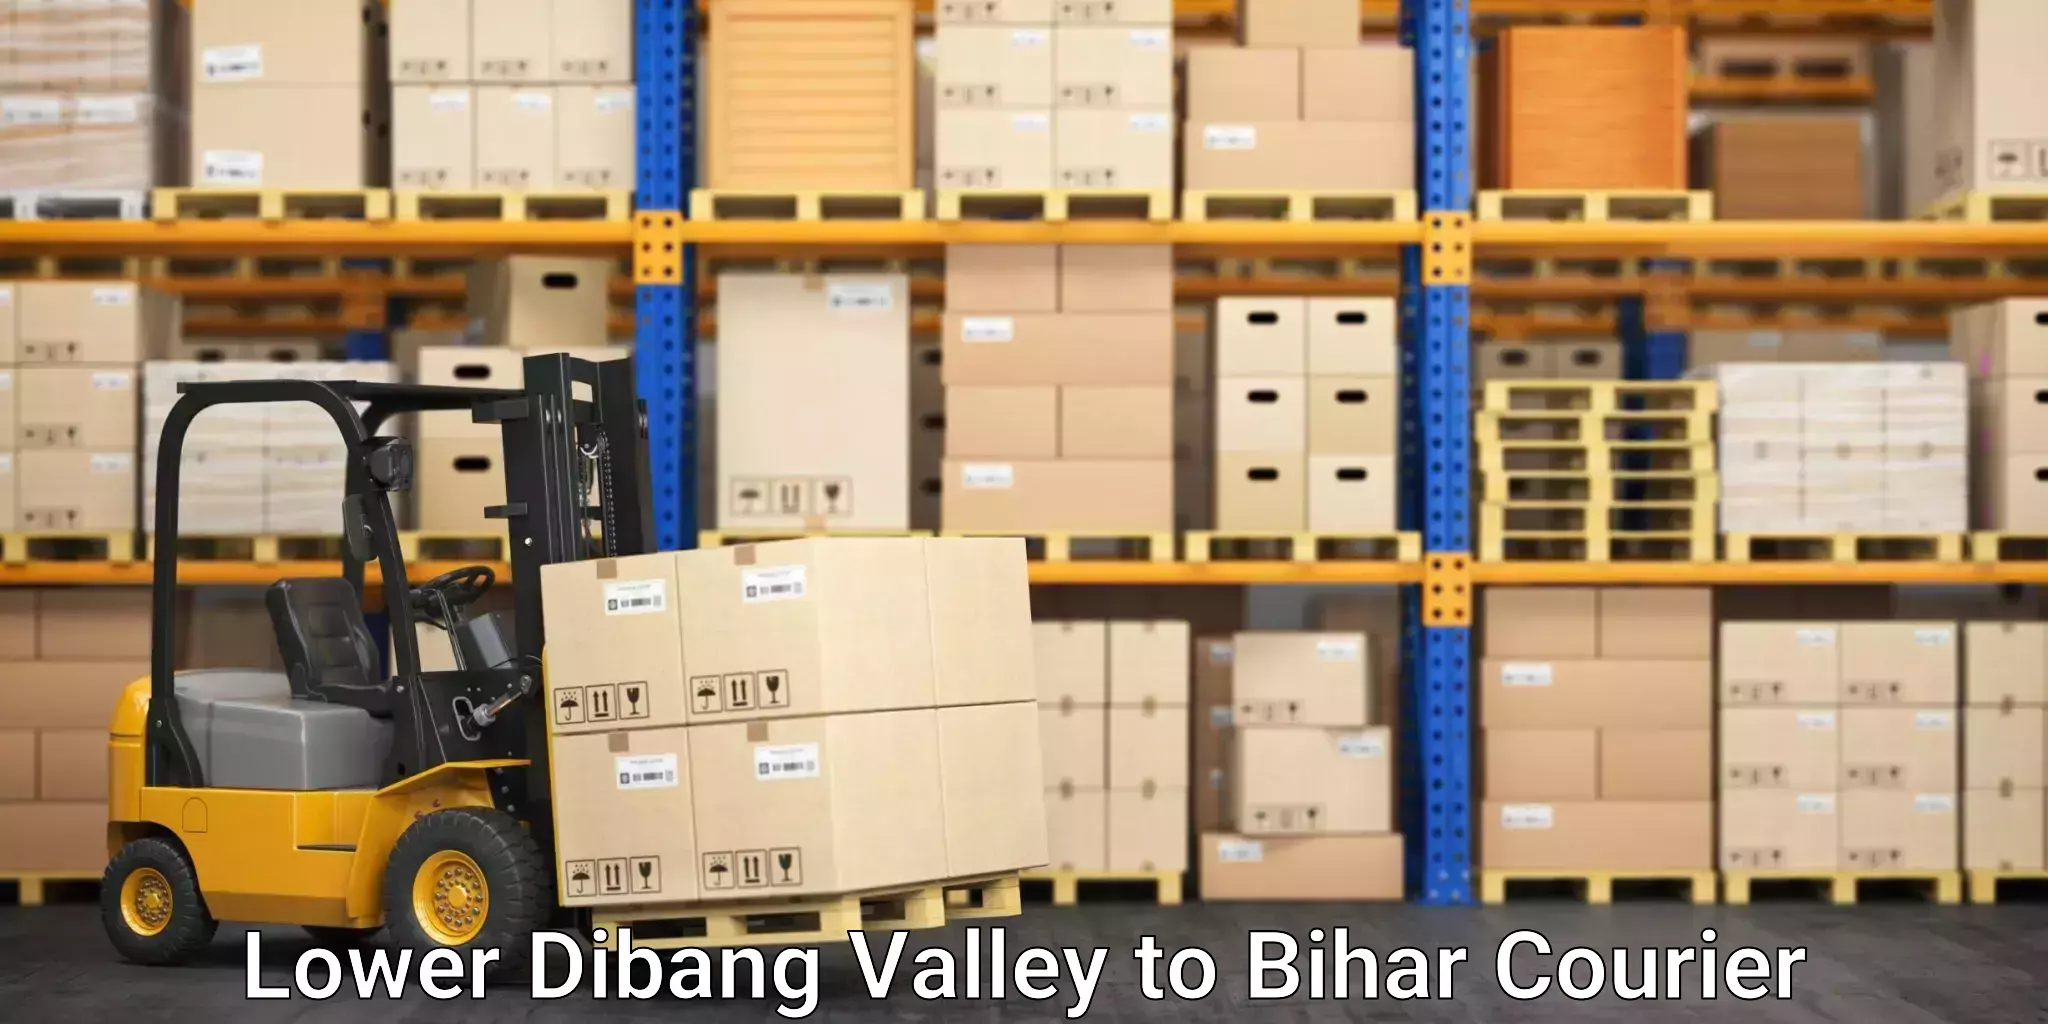 Nationwide shipping services in Lower Dibang Valley to East Champaran